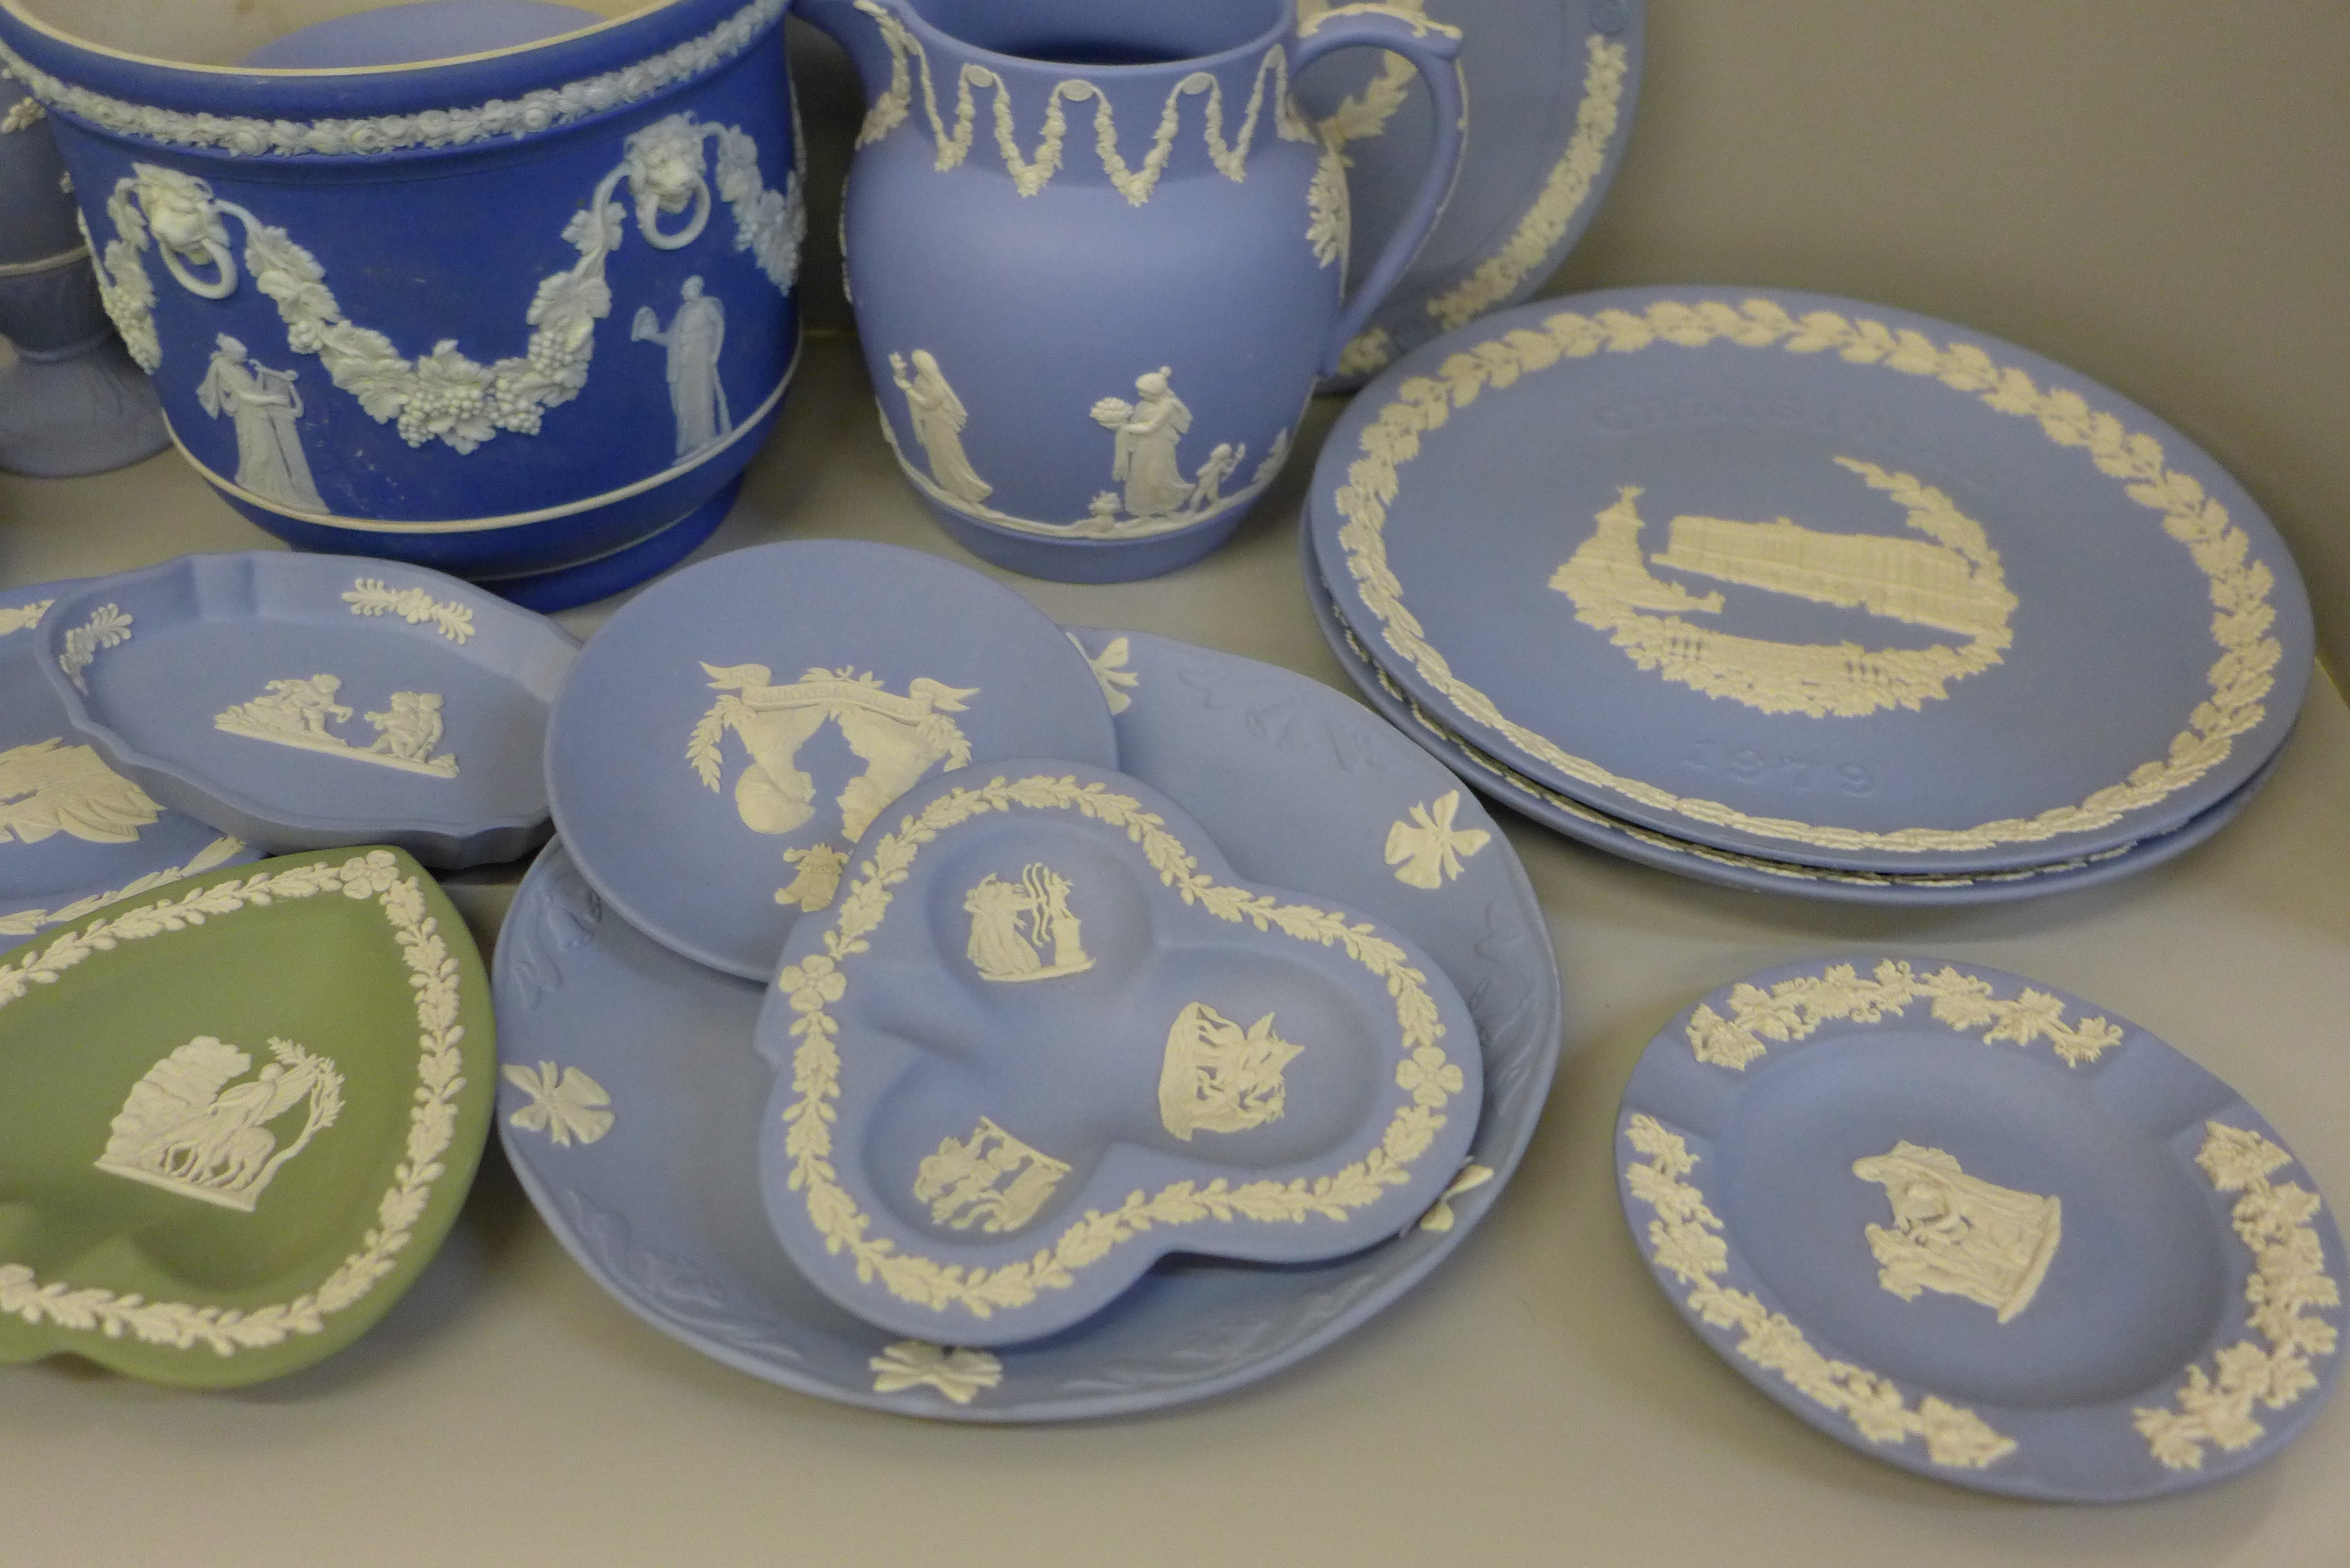 A box of approximately 20 items of Wedgwood Jasperware including a jardiniere, jug, vases, lidded - Image 4 of 5